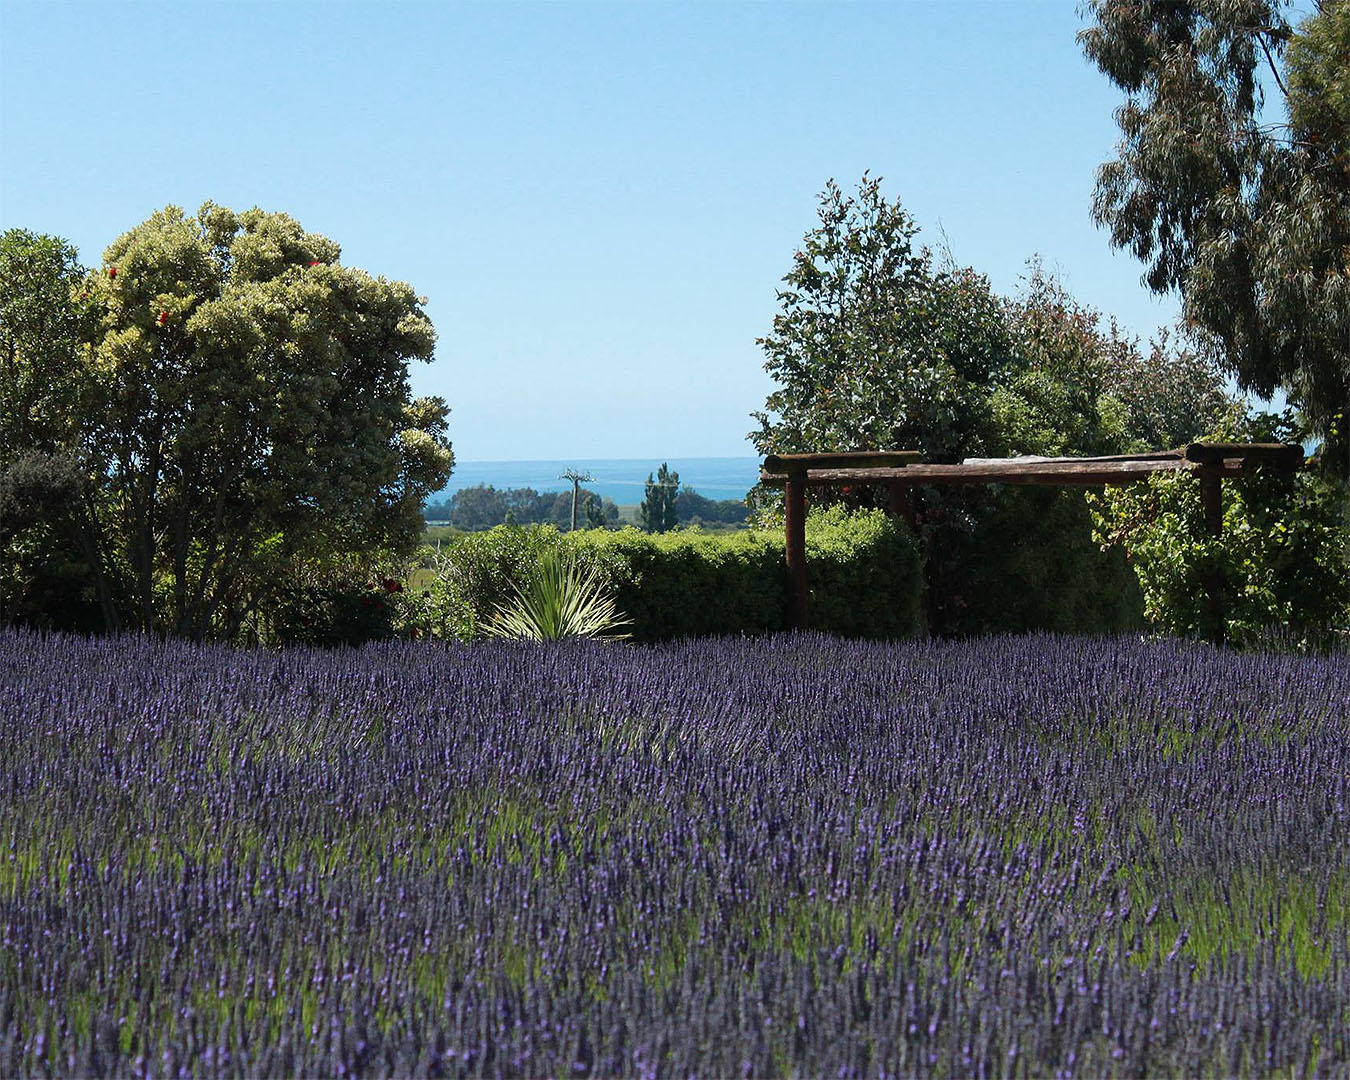 Lavender covers the foreground with rolling mountains in the background